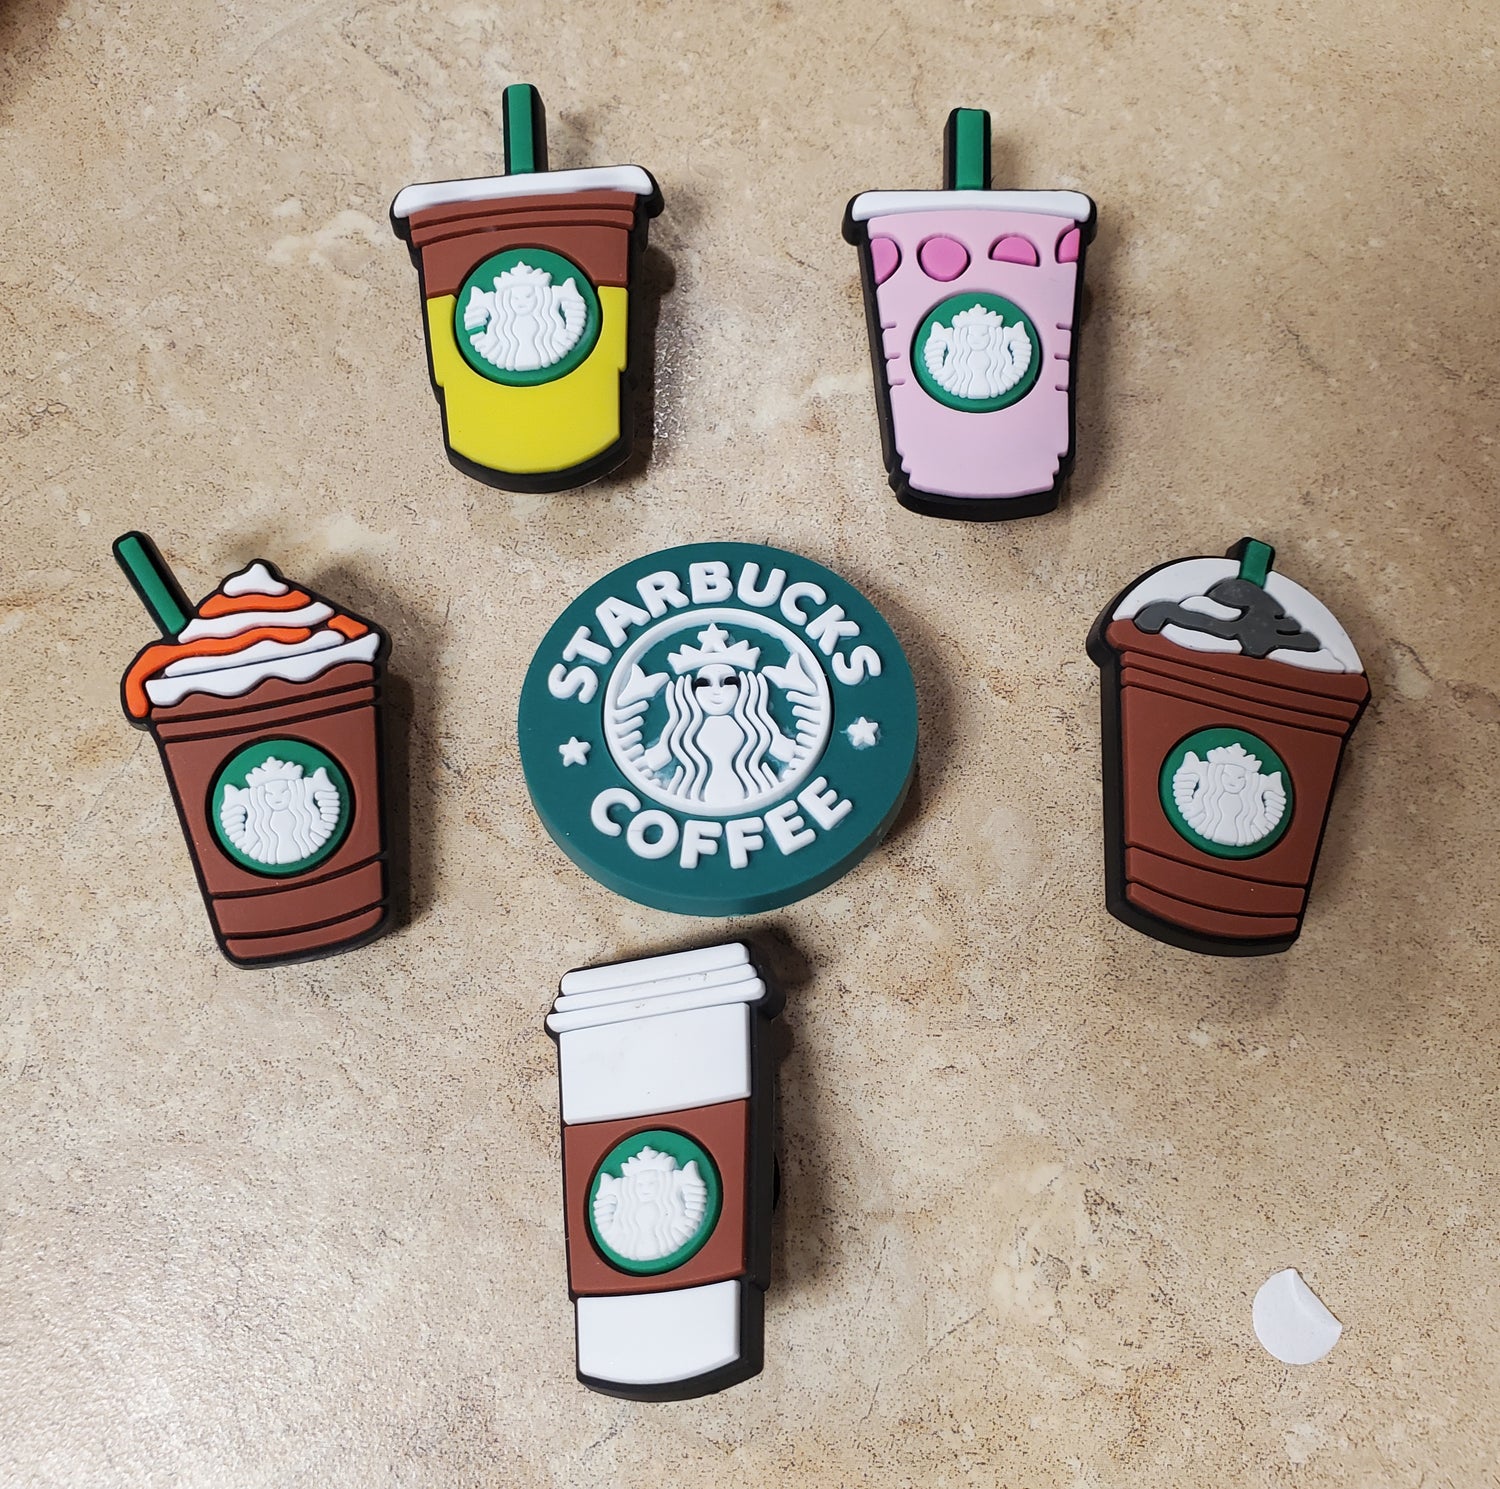 Chick Fil A & Starbucks Shoe Charms for Crocs Collections – Liz's Chaos  Molds & More